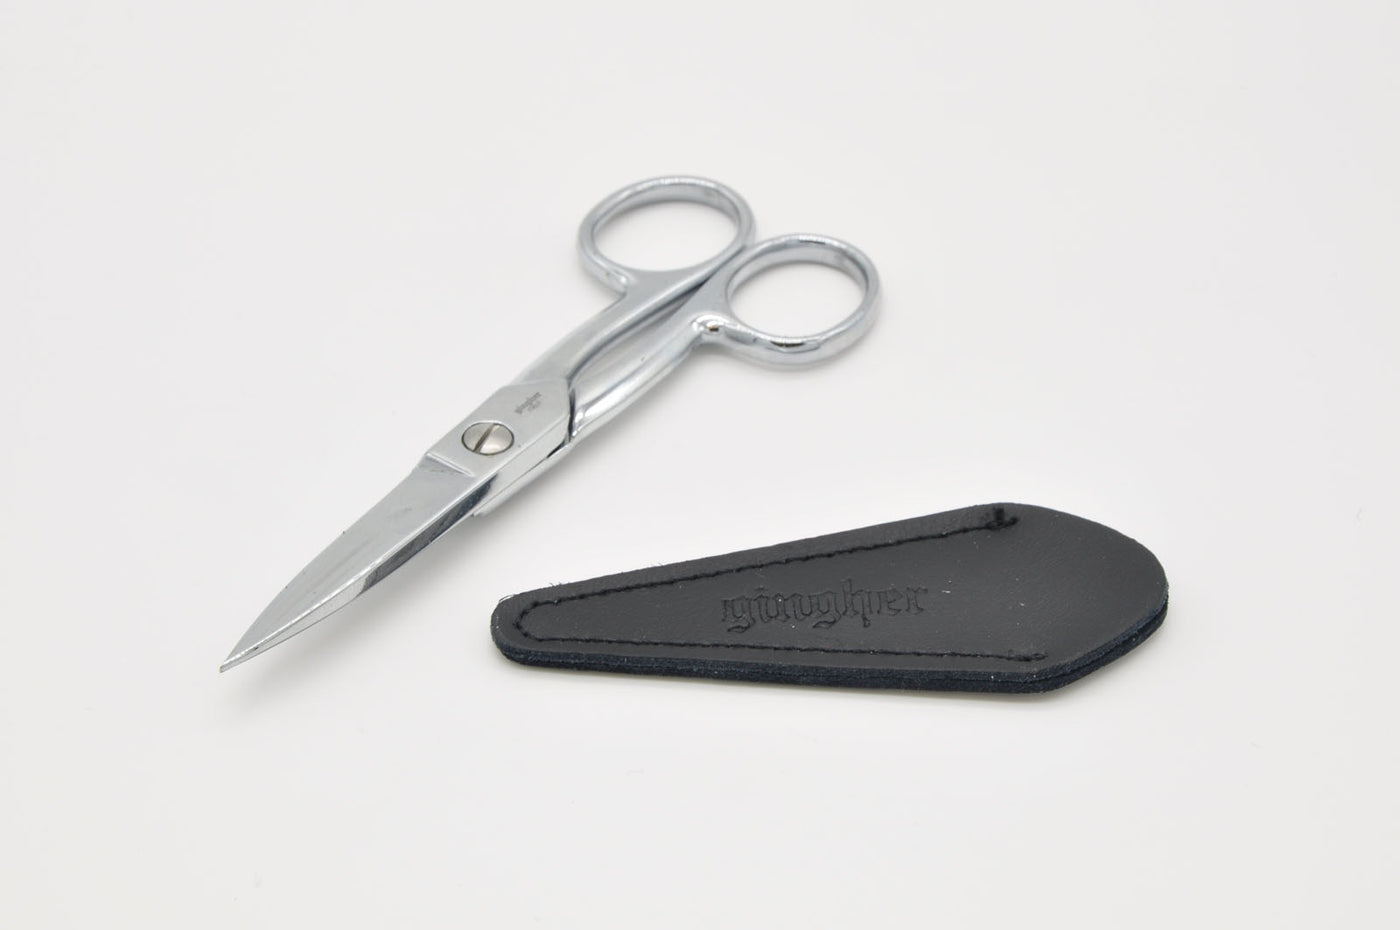 Gingher 5" All-Purpose Tailor's Points Scissors